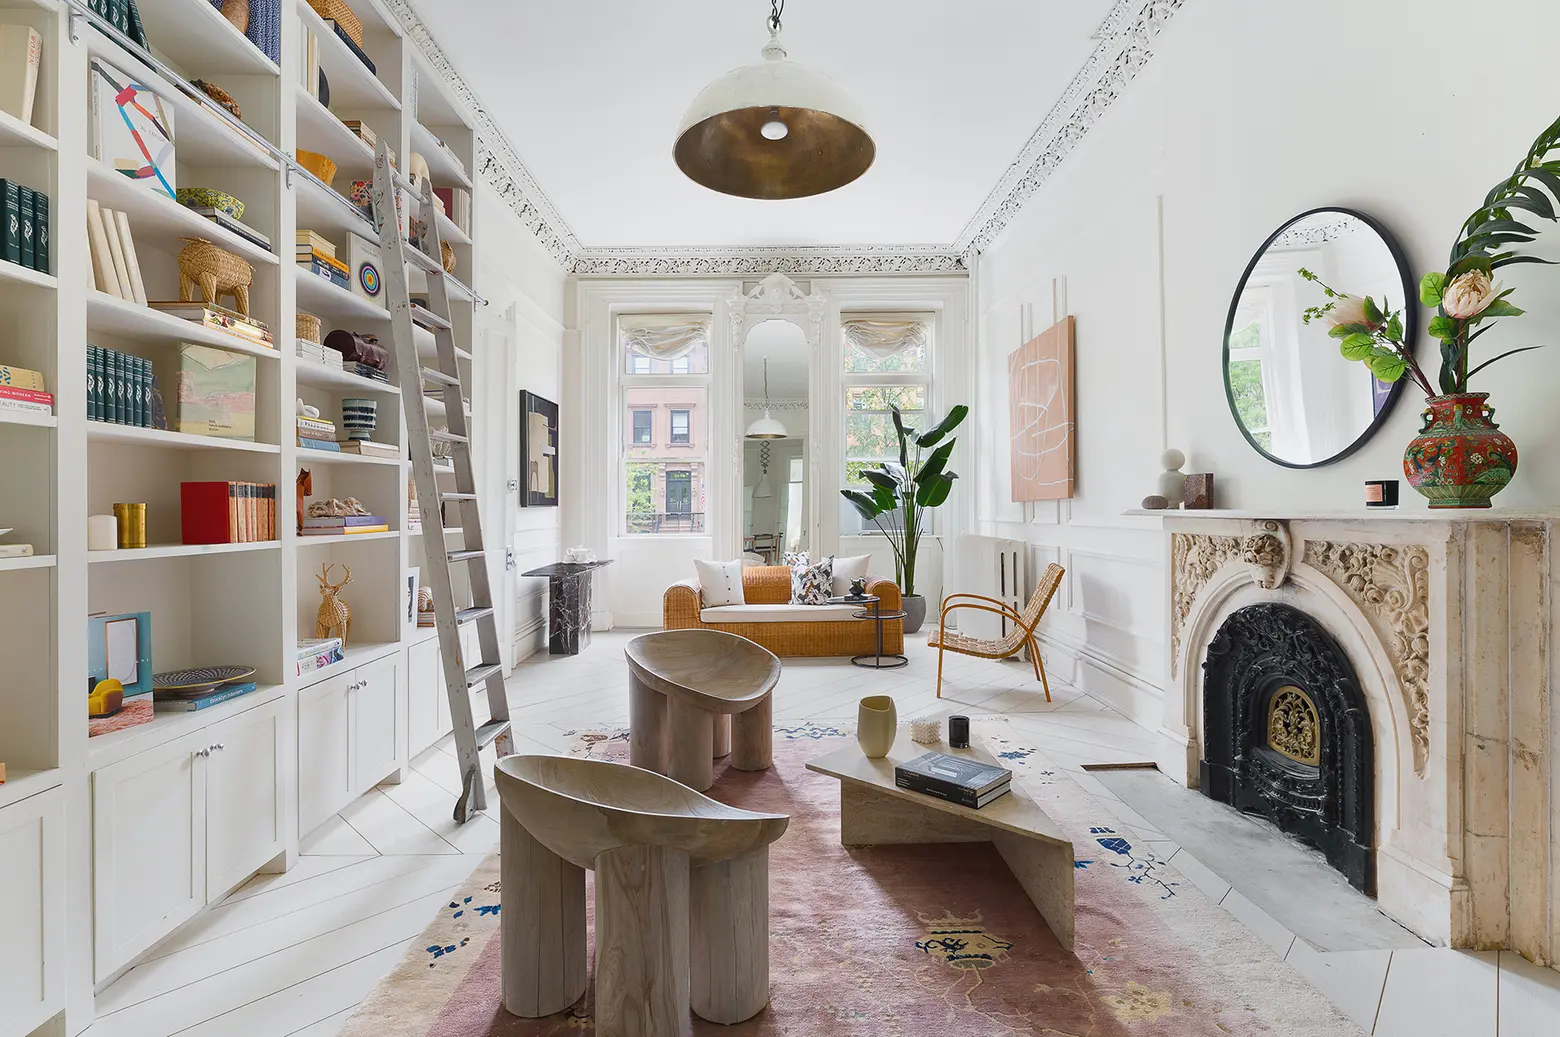 Cupcake moldings are the icing on the cake at this sweet Carroll Gardens co-op, asking $1.7M